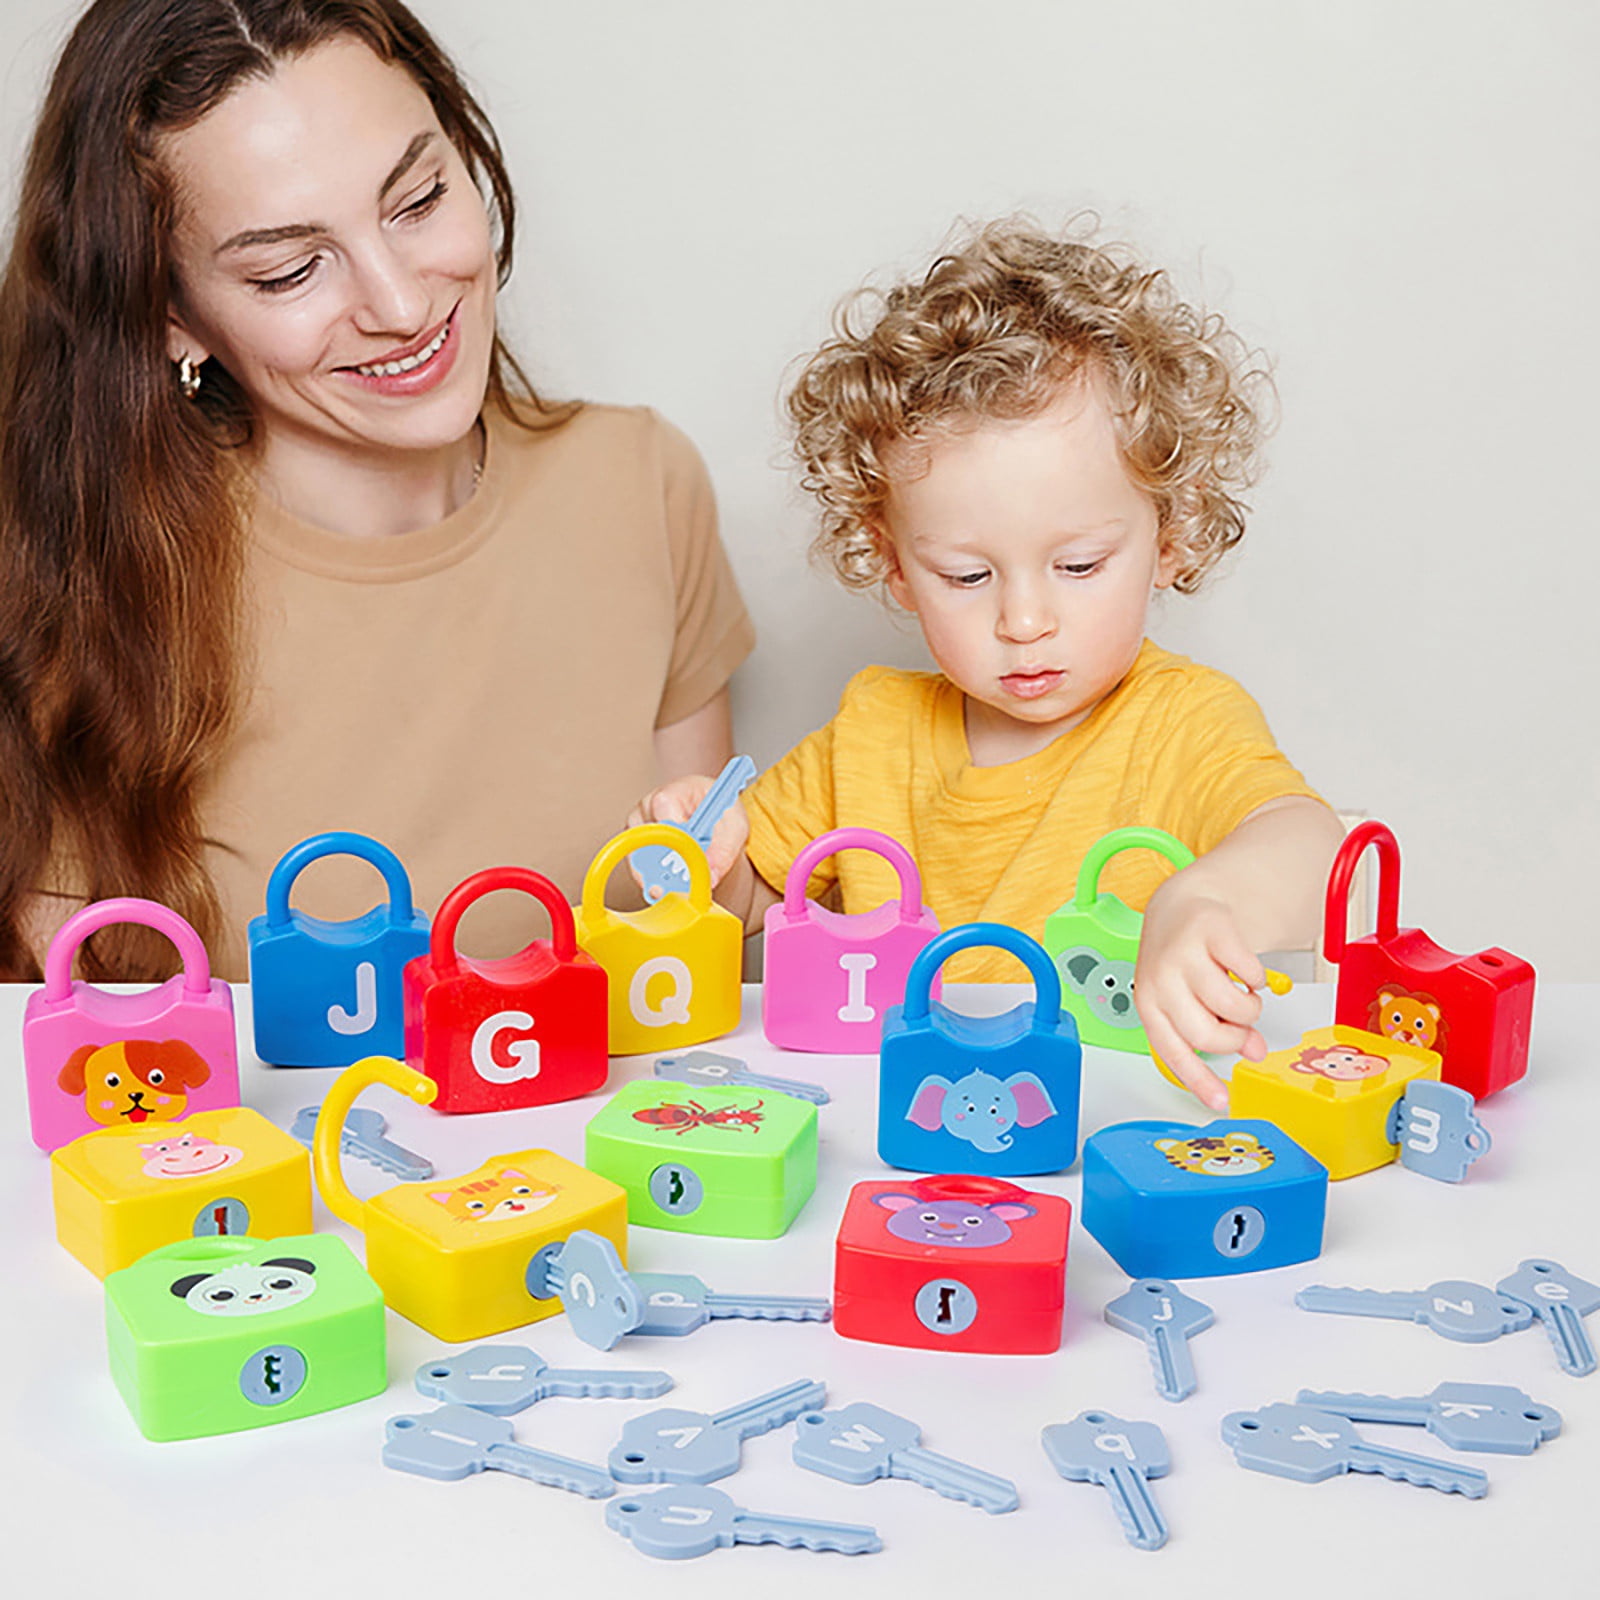 Unlocking Set Educational Montessori Toy for Toddlers Preschool Learning Kids 